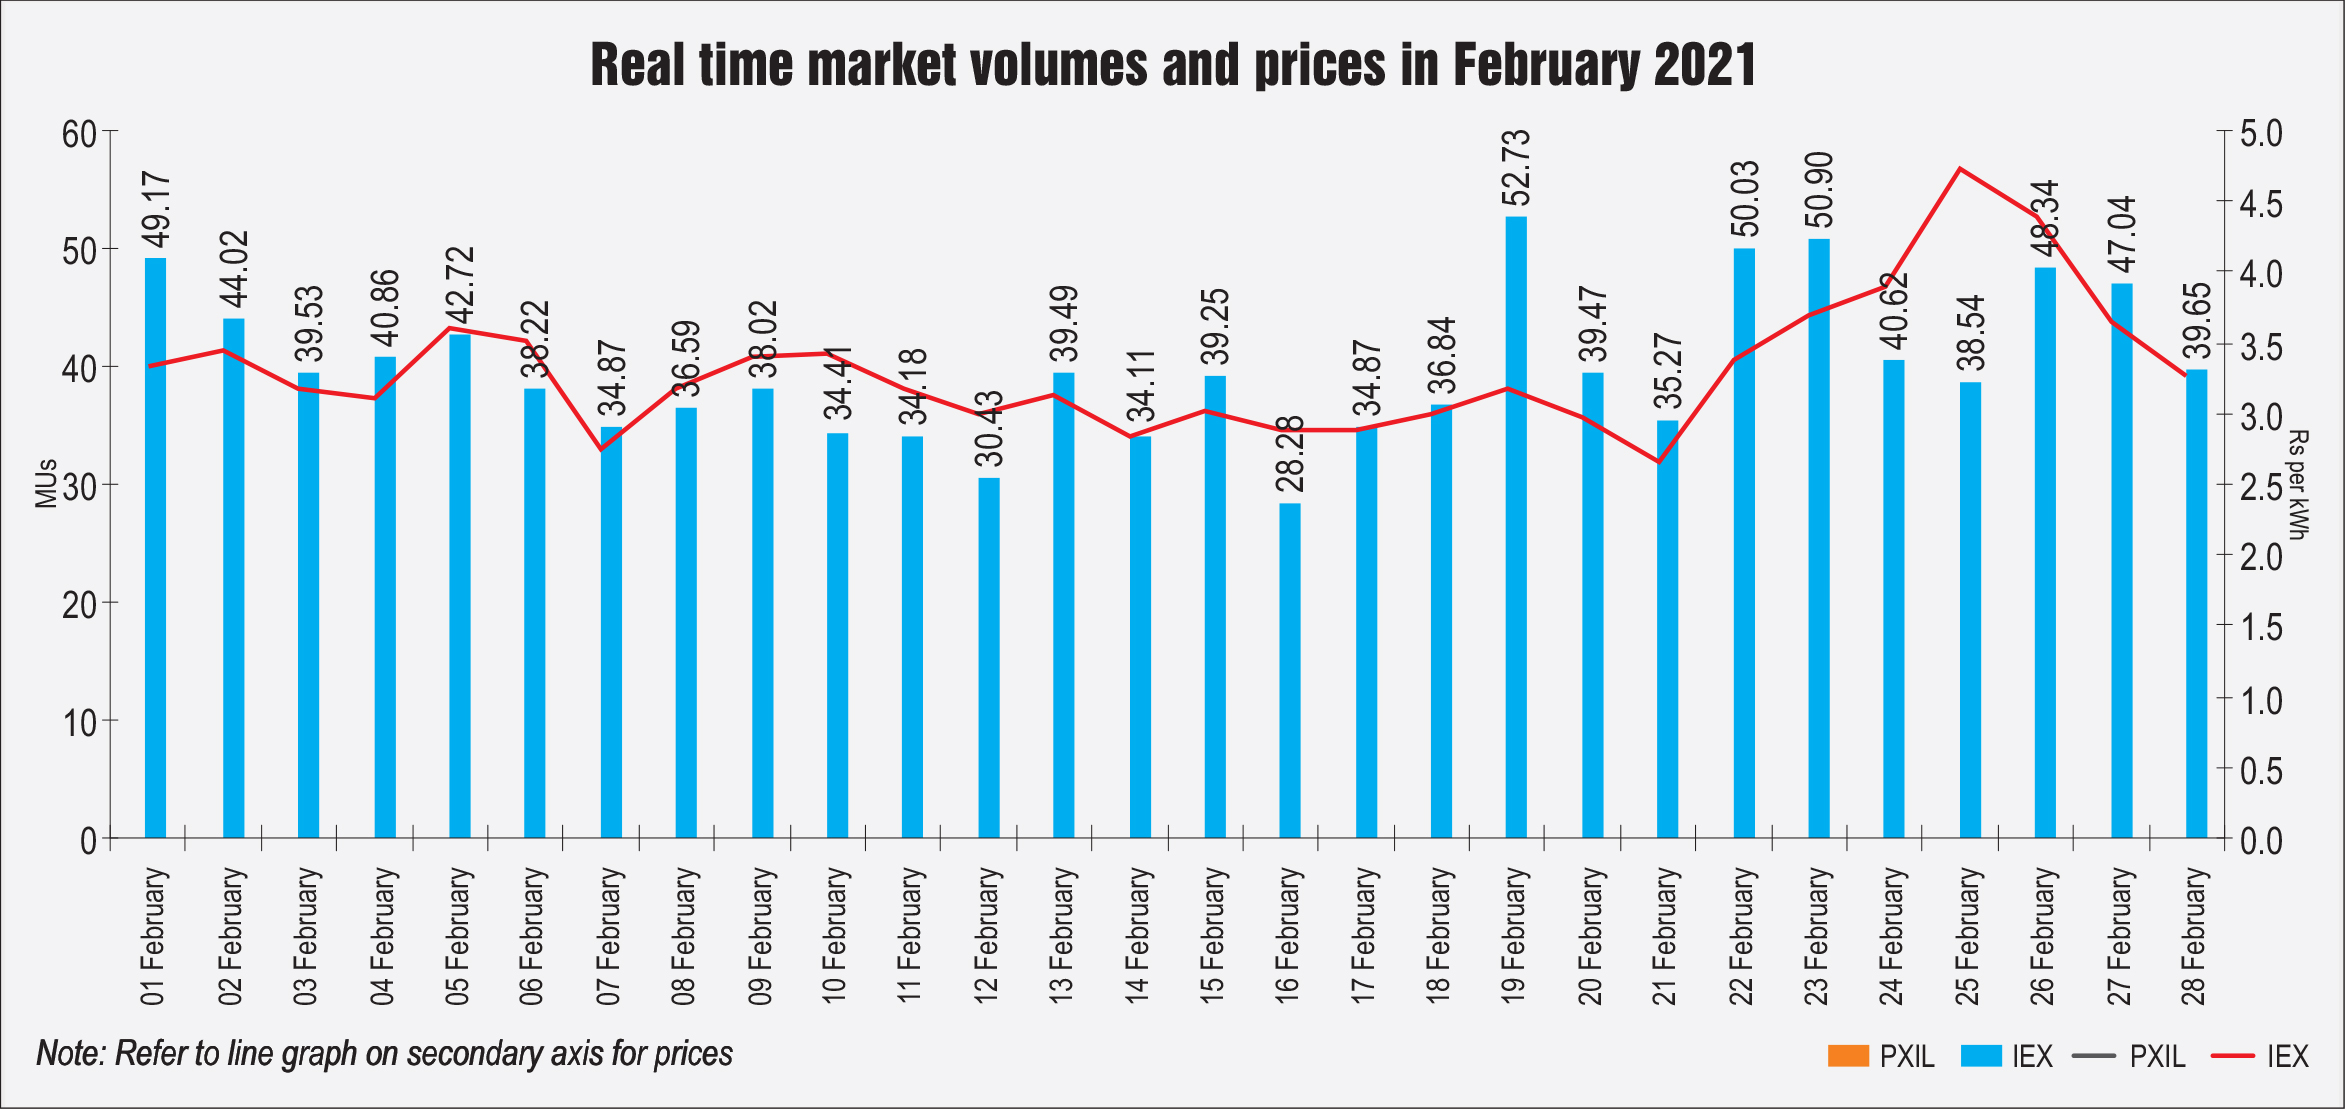 Real time market volumes and prices in February 2021